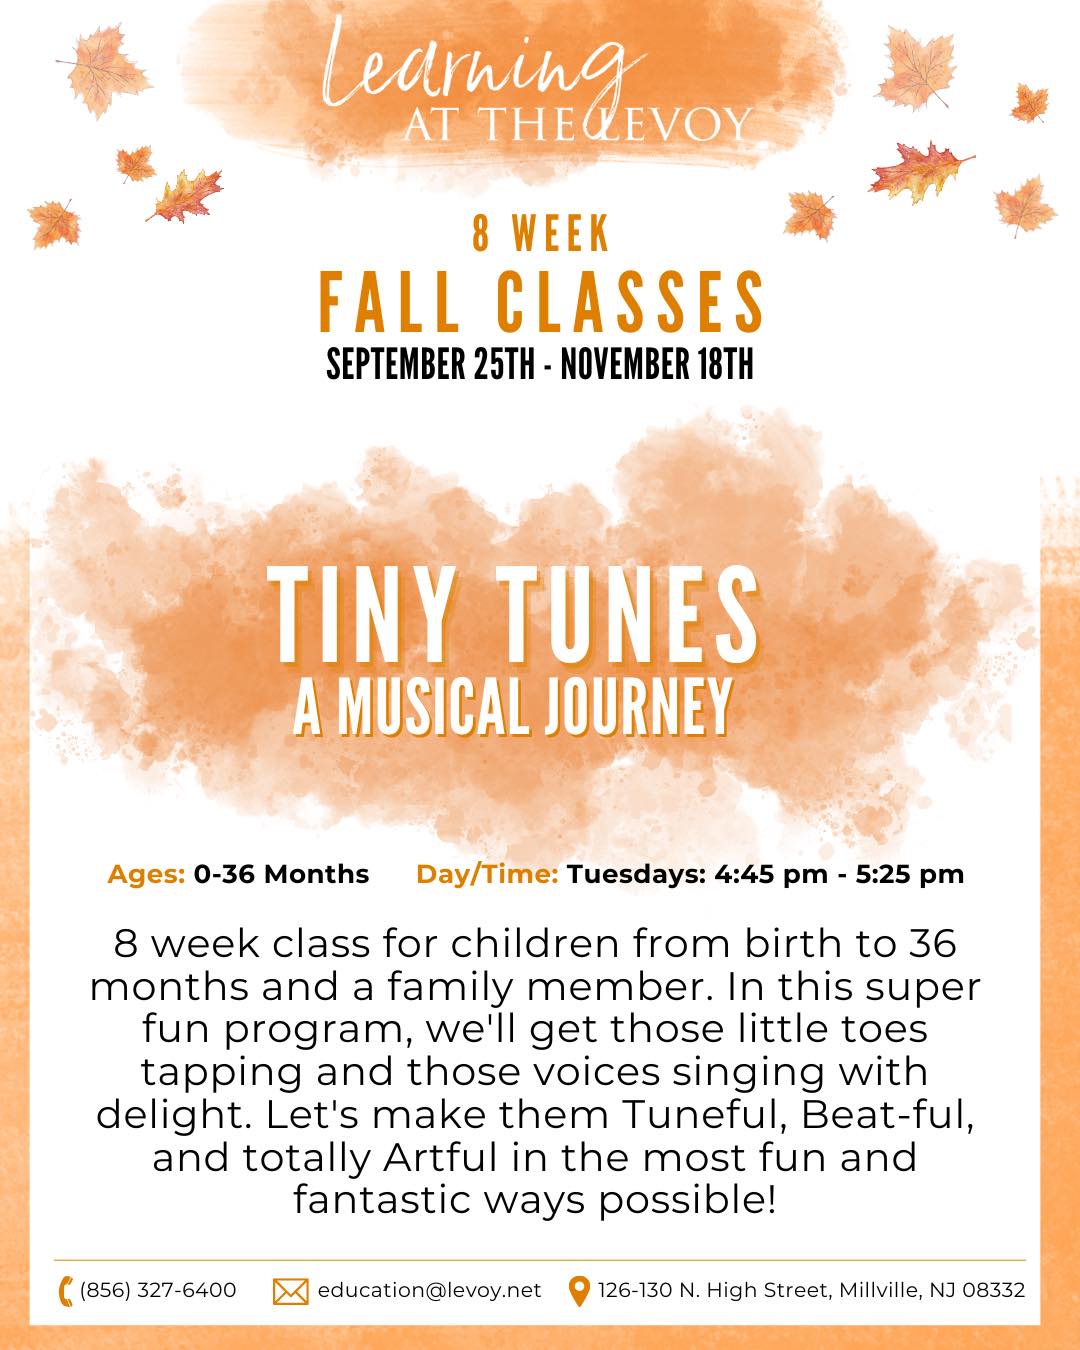 tiny-tunes-a-musical-journey-2023-lessons-for-infants